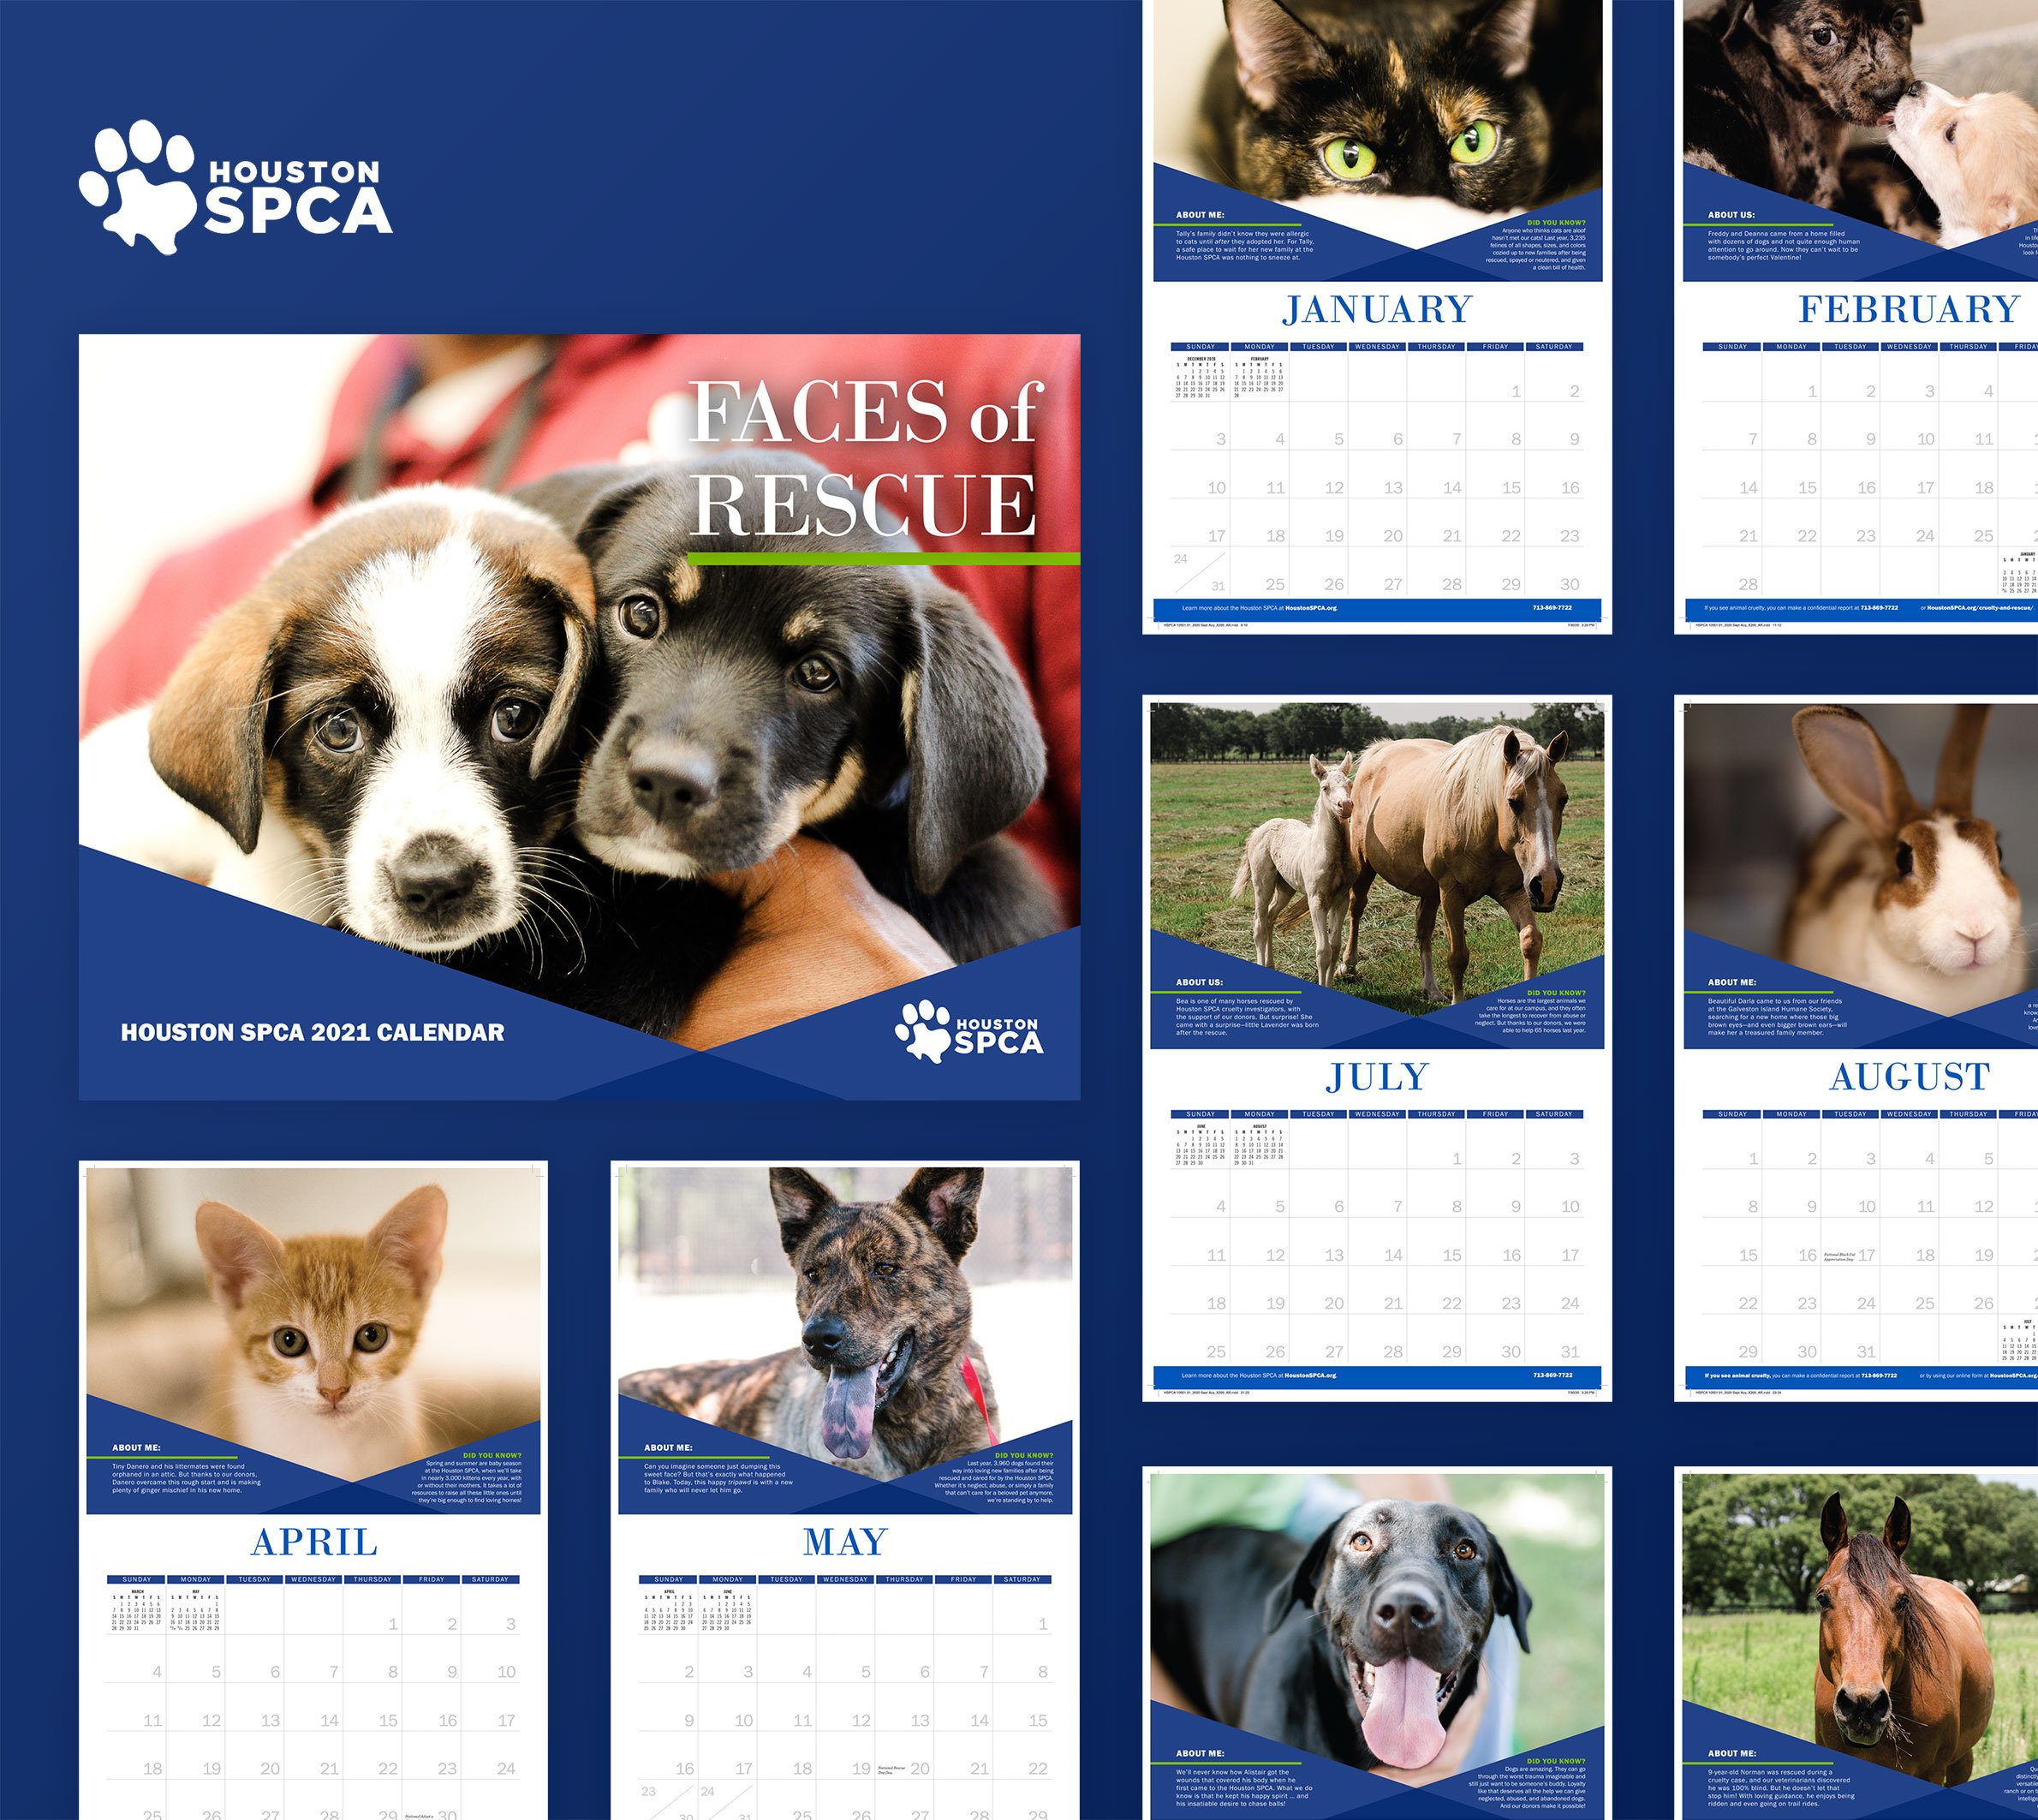 An example of a direct mail fundraising campaign for Houston SPCA by Allegiance Group.